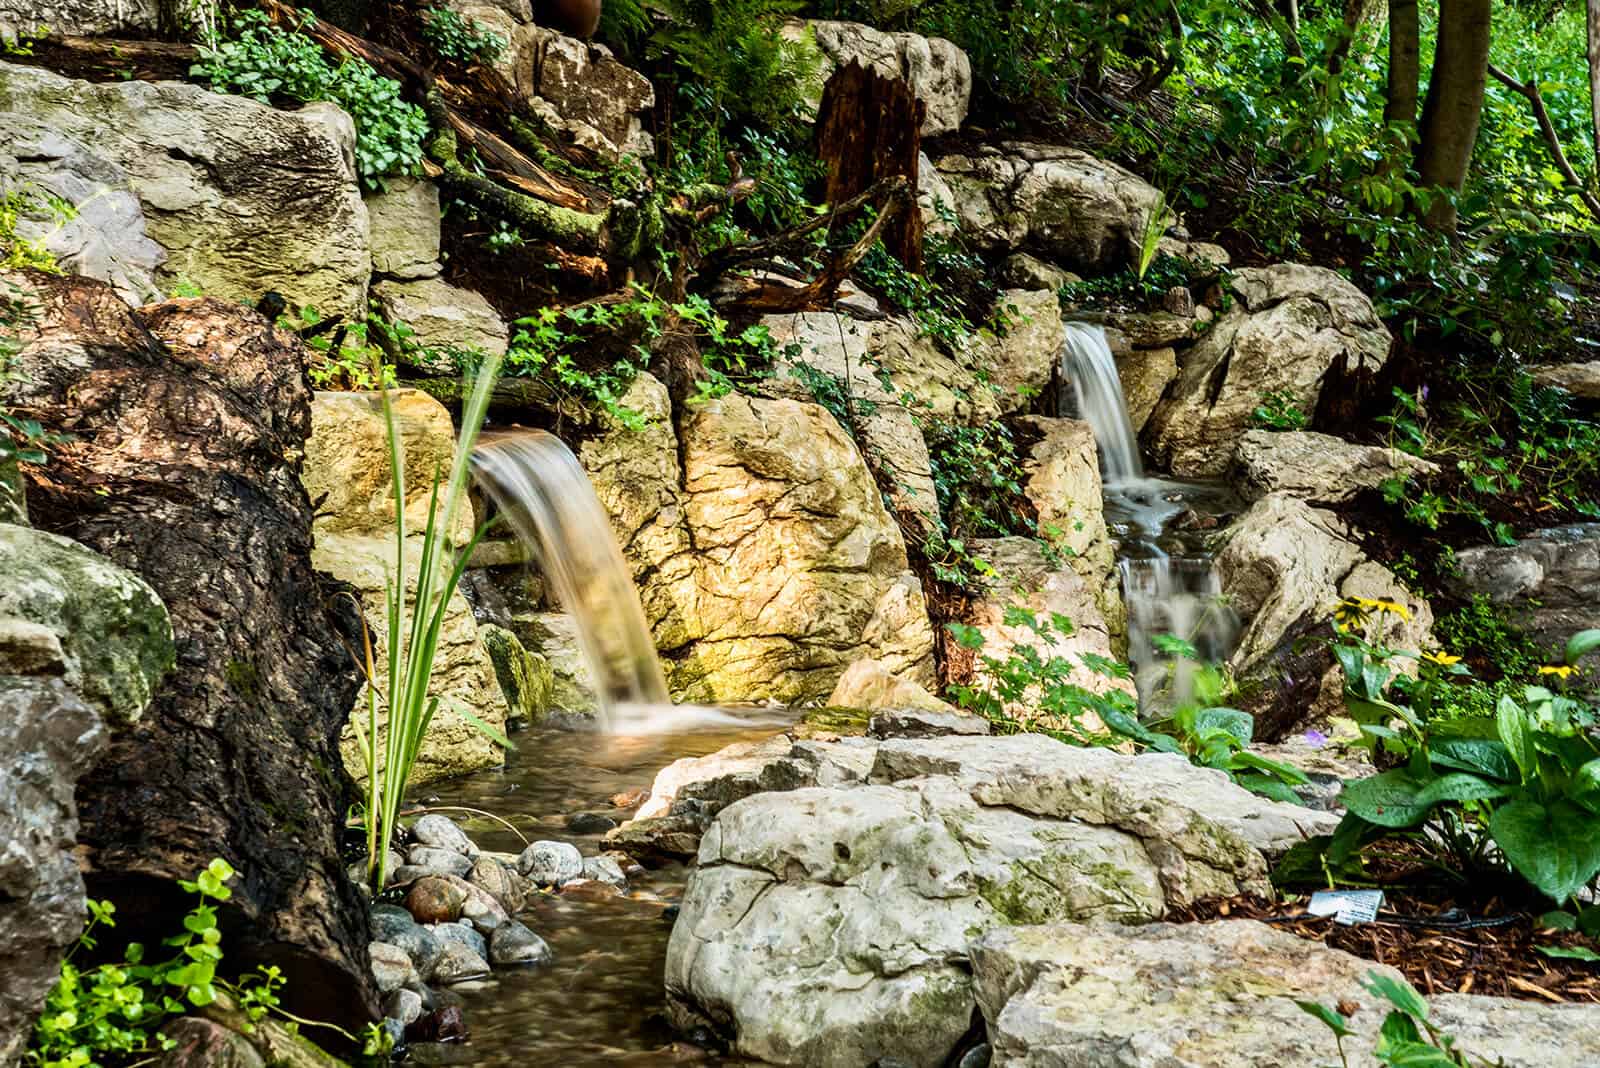 https://prittylandscapes.com/wp-content/uploads/2022/03/waterfall-and-streams.jpg